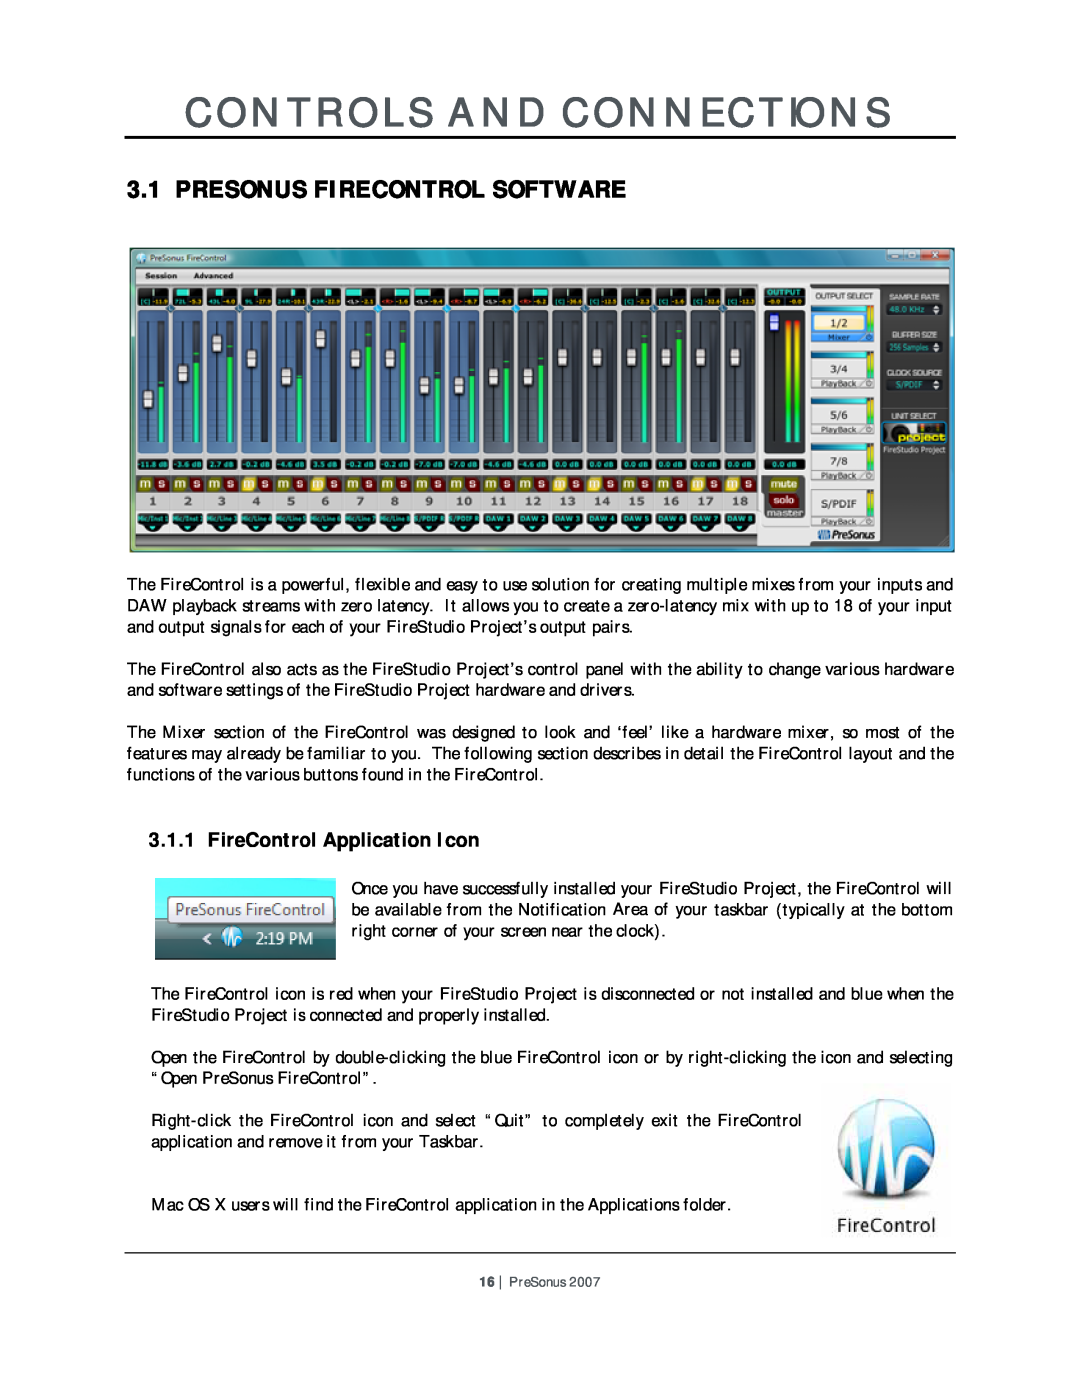 Presonus Audio electronic Version 1.0 user manual Controls And Connections, Presonus Firecontrol Software 